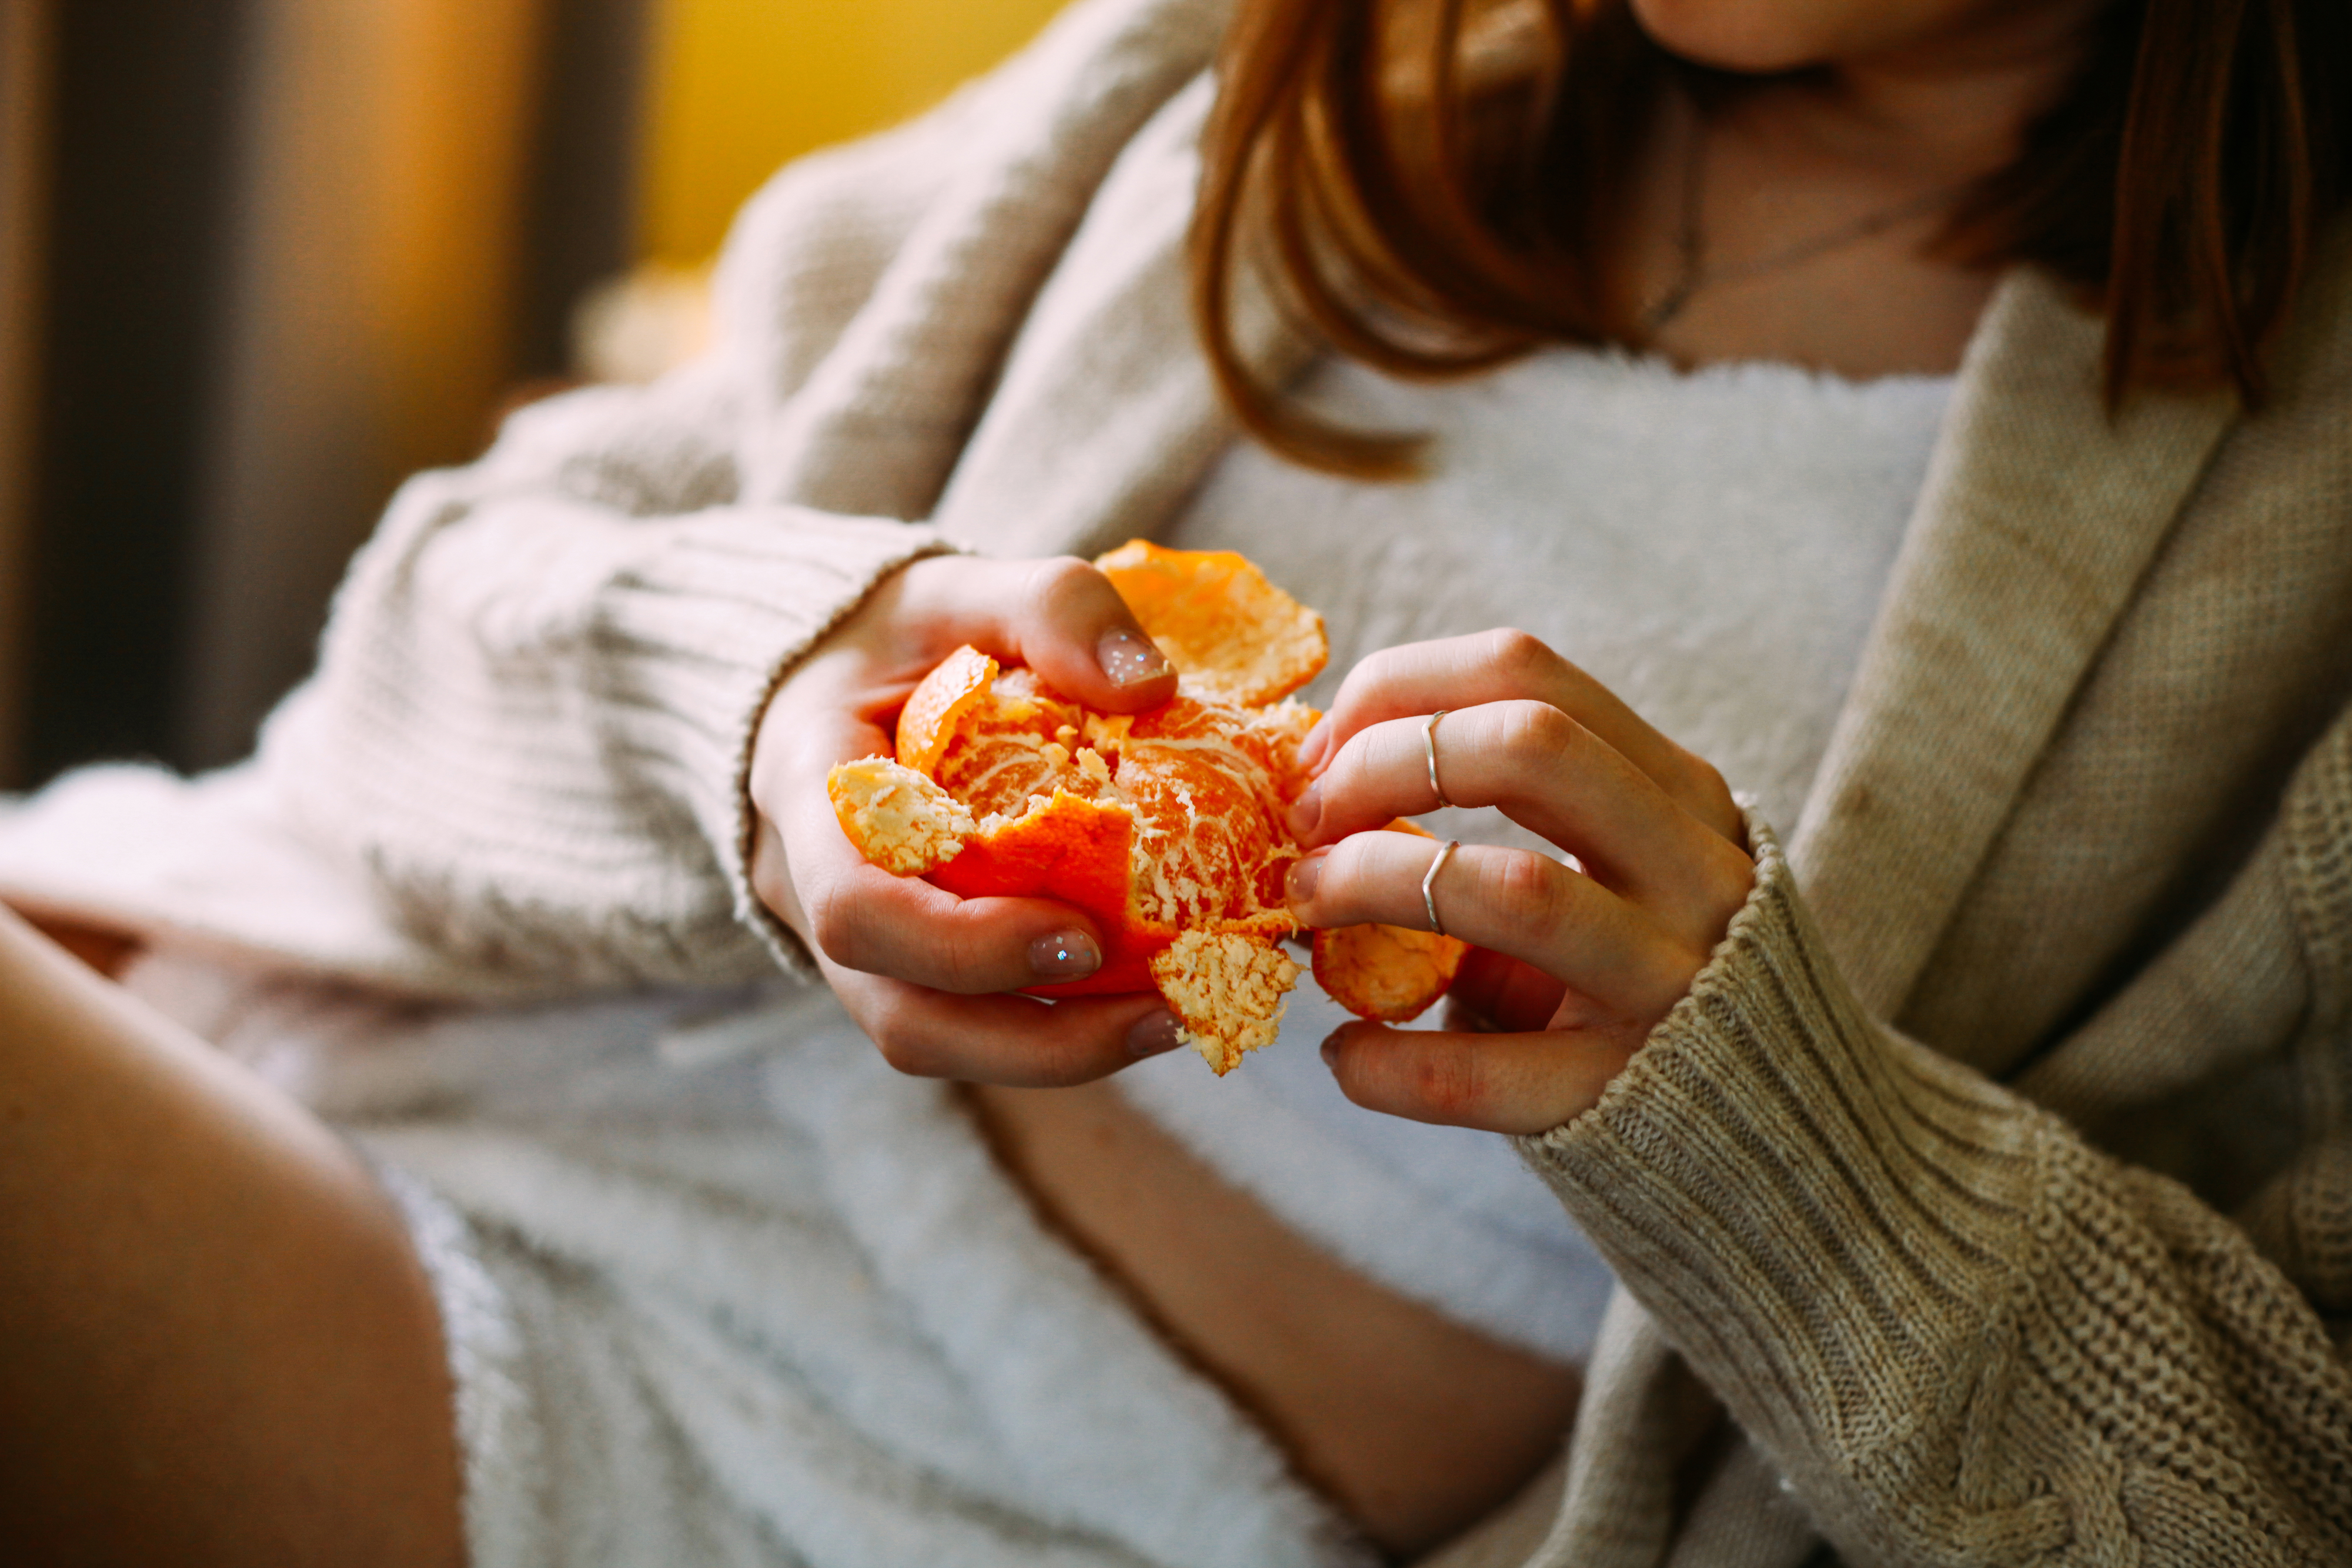 Person peeling an orange with both hands, wearing a cozy beige cardigan